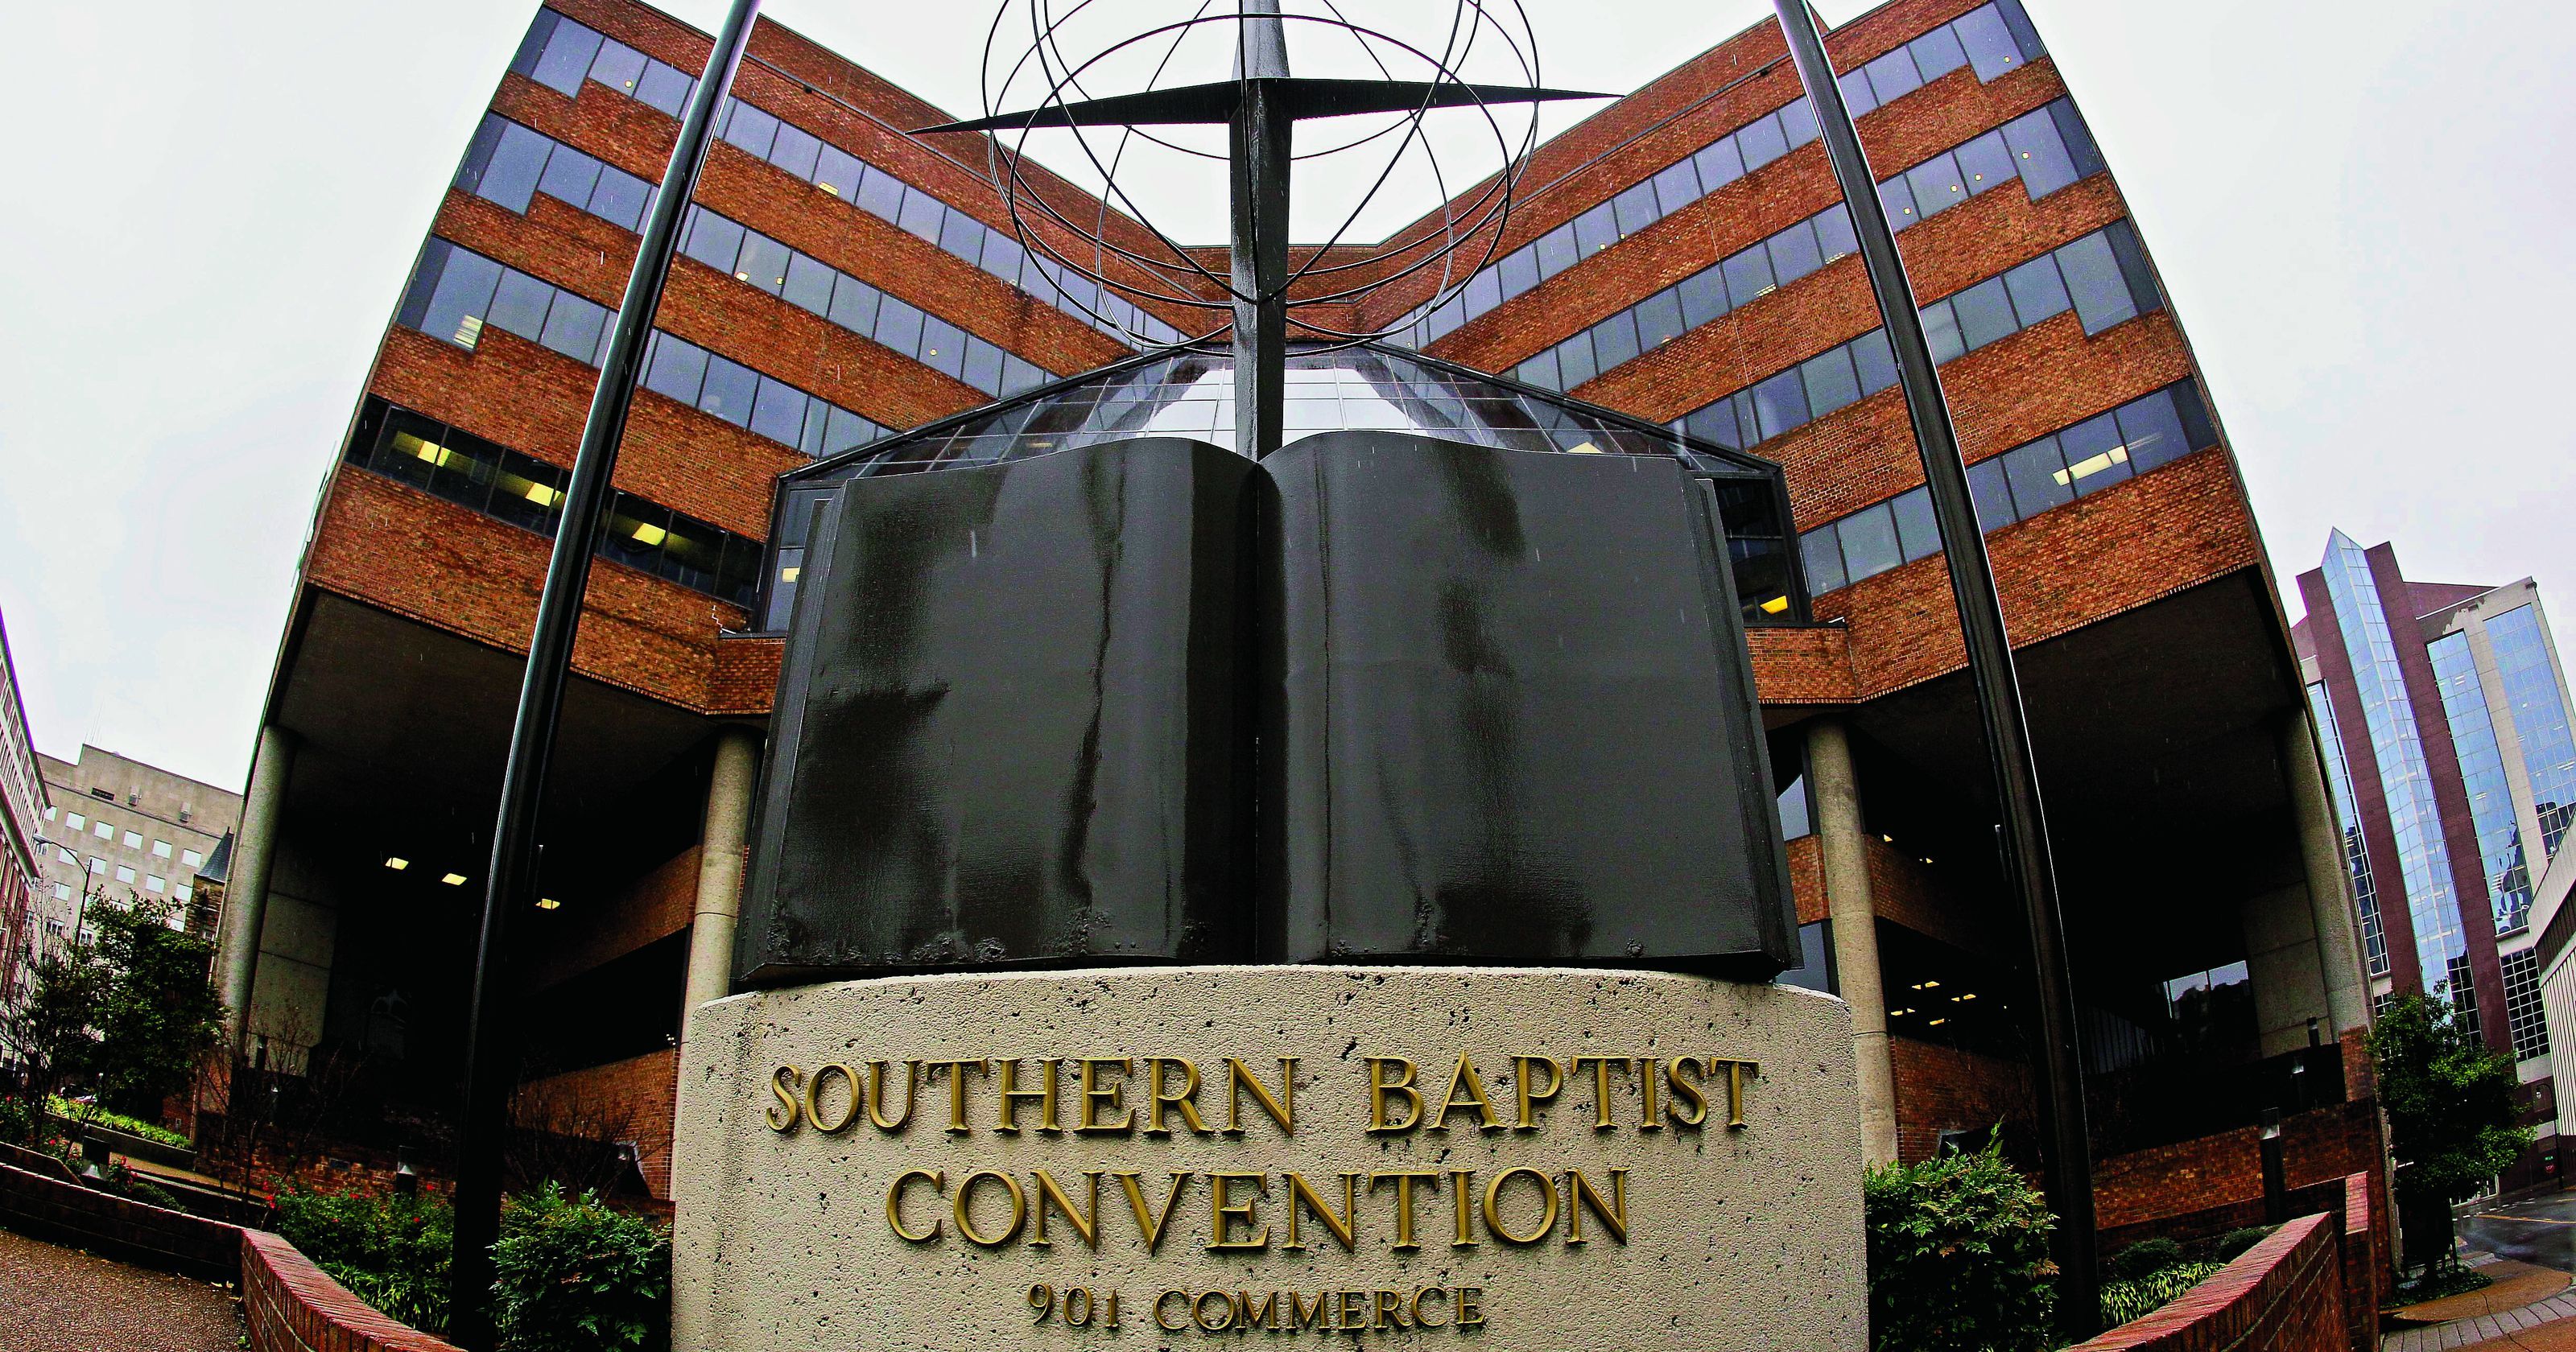 Southern Baptist Convention Headquarters